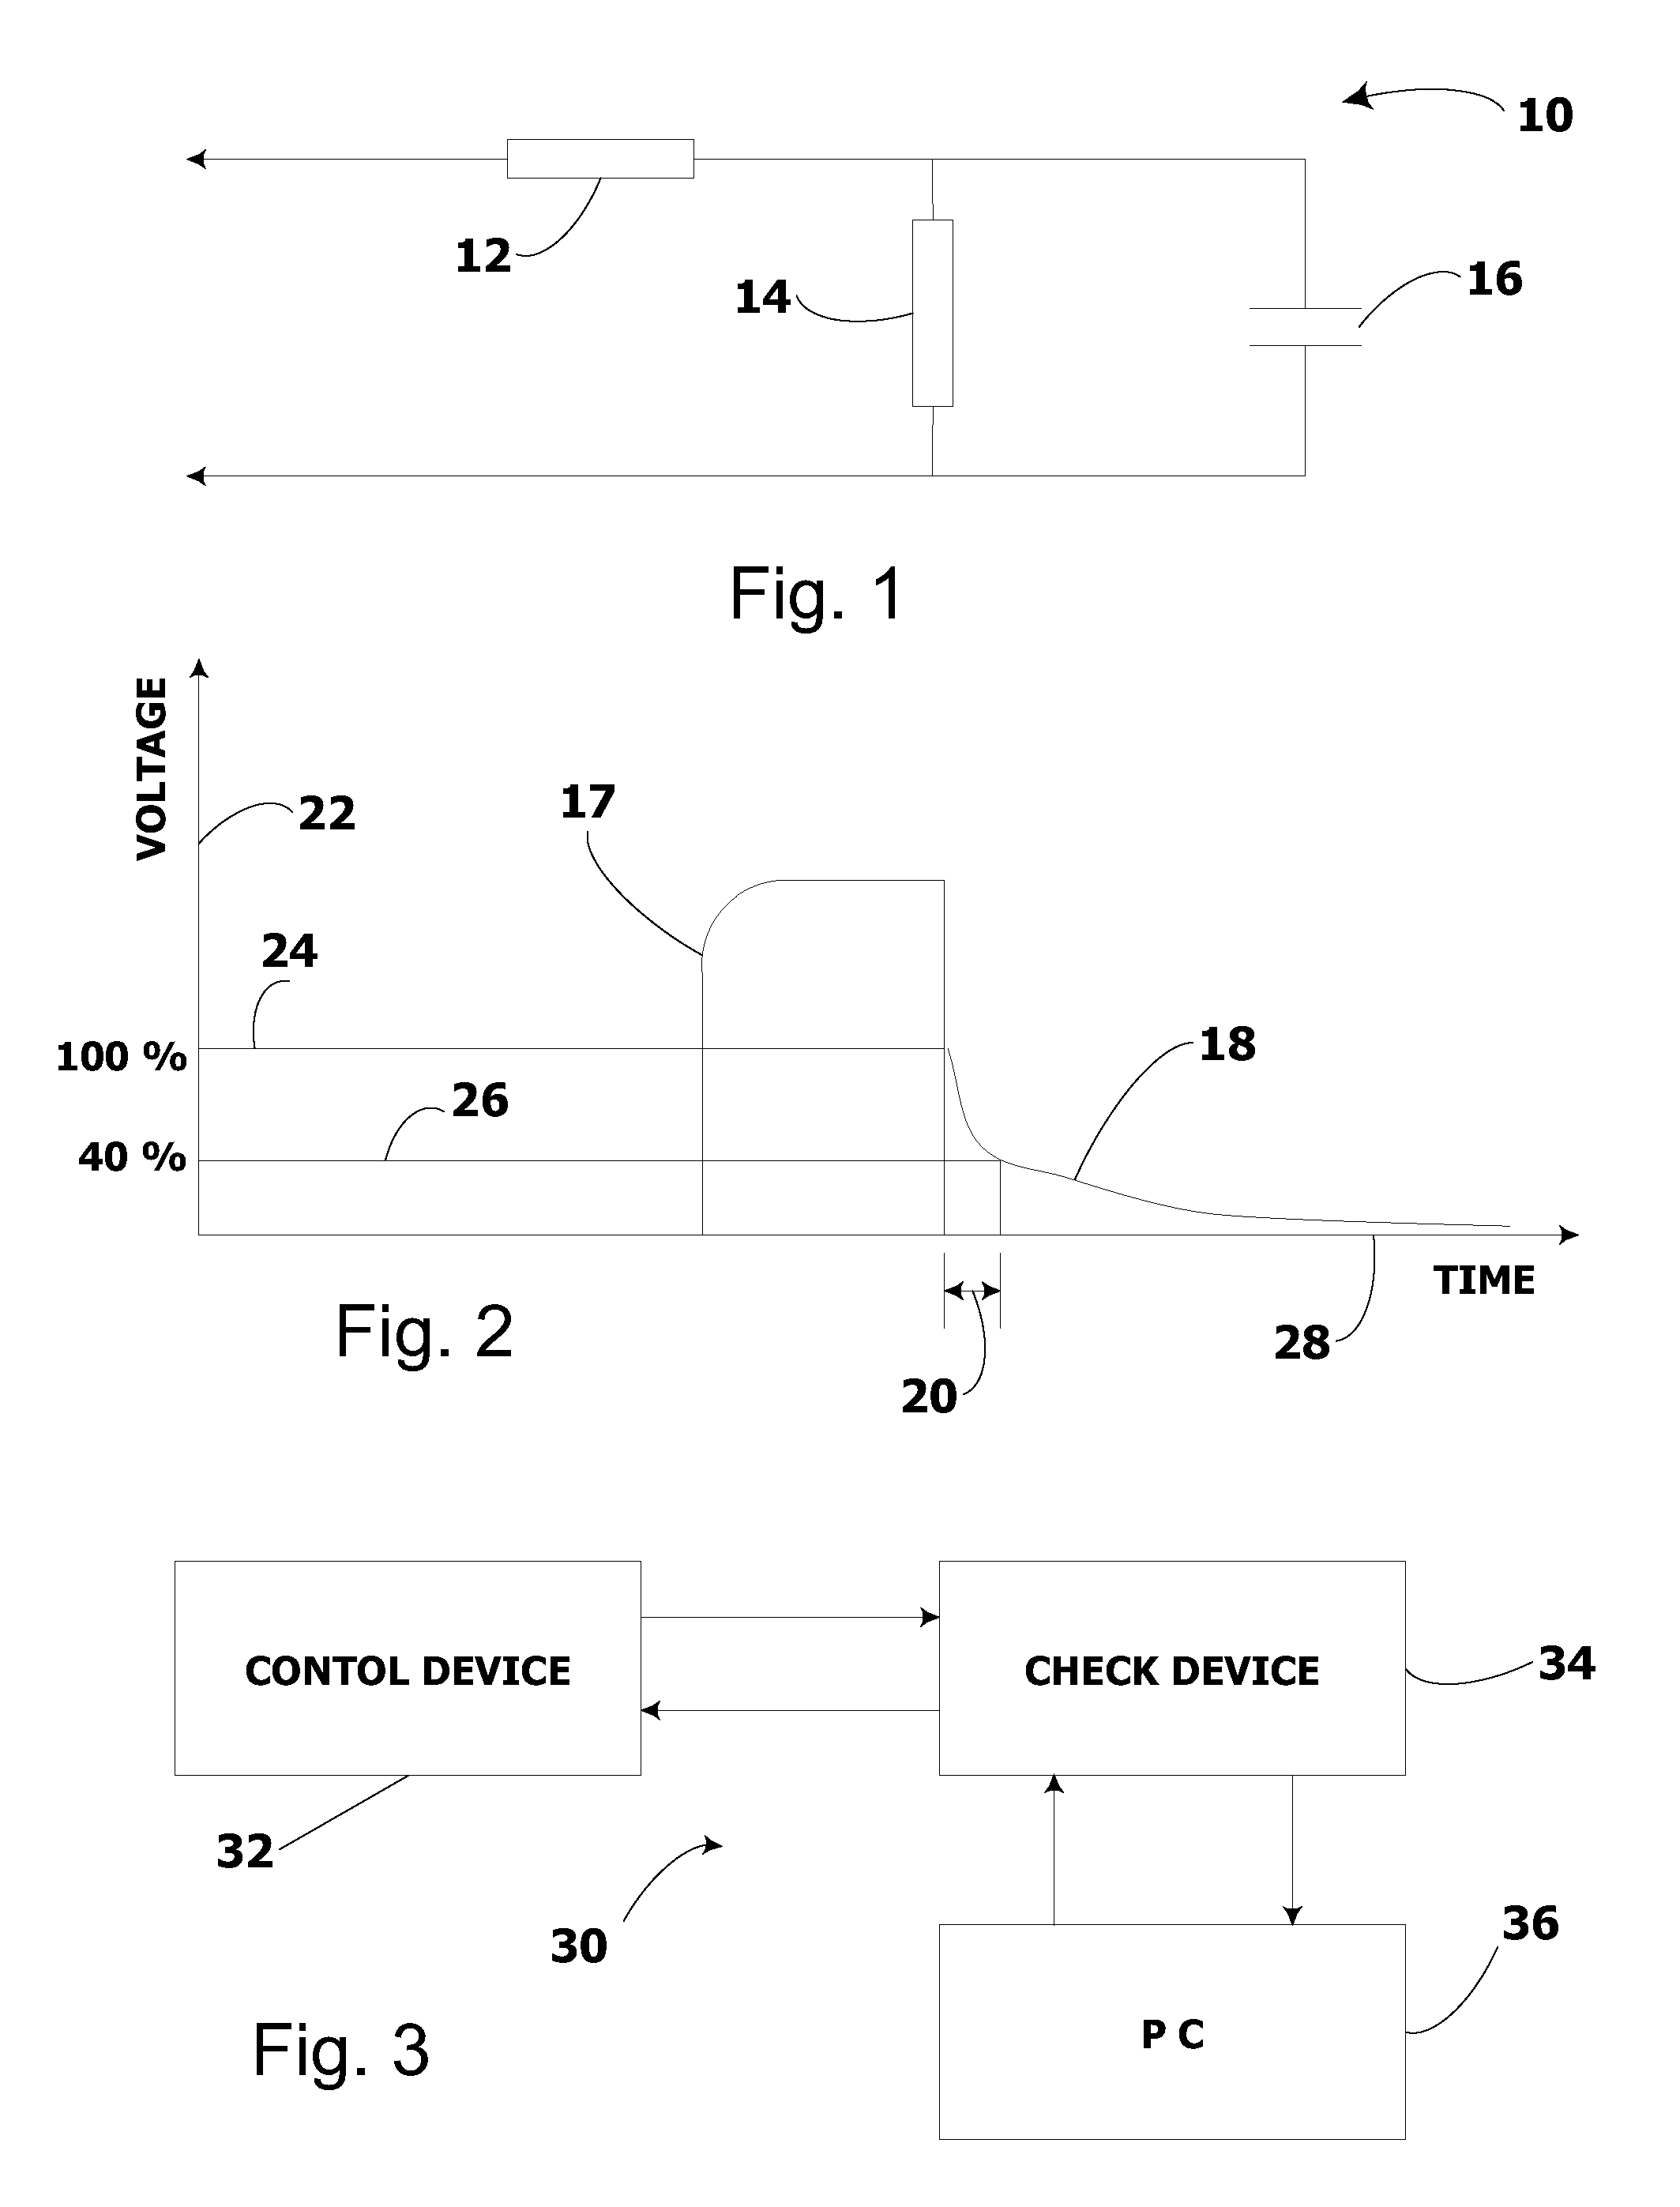 System and method for electrical stimulation of salivation